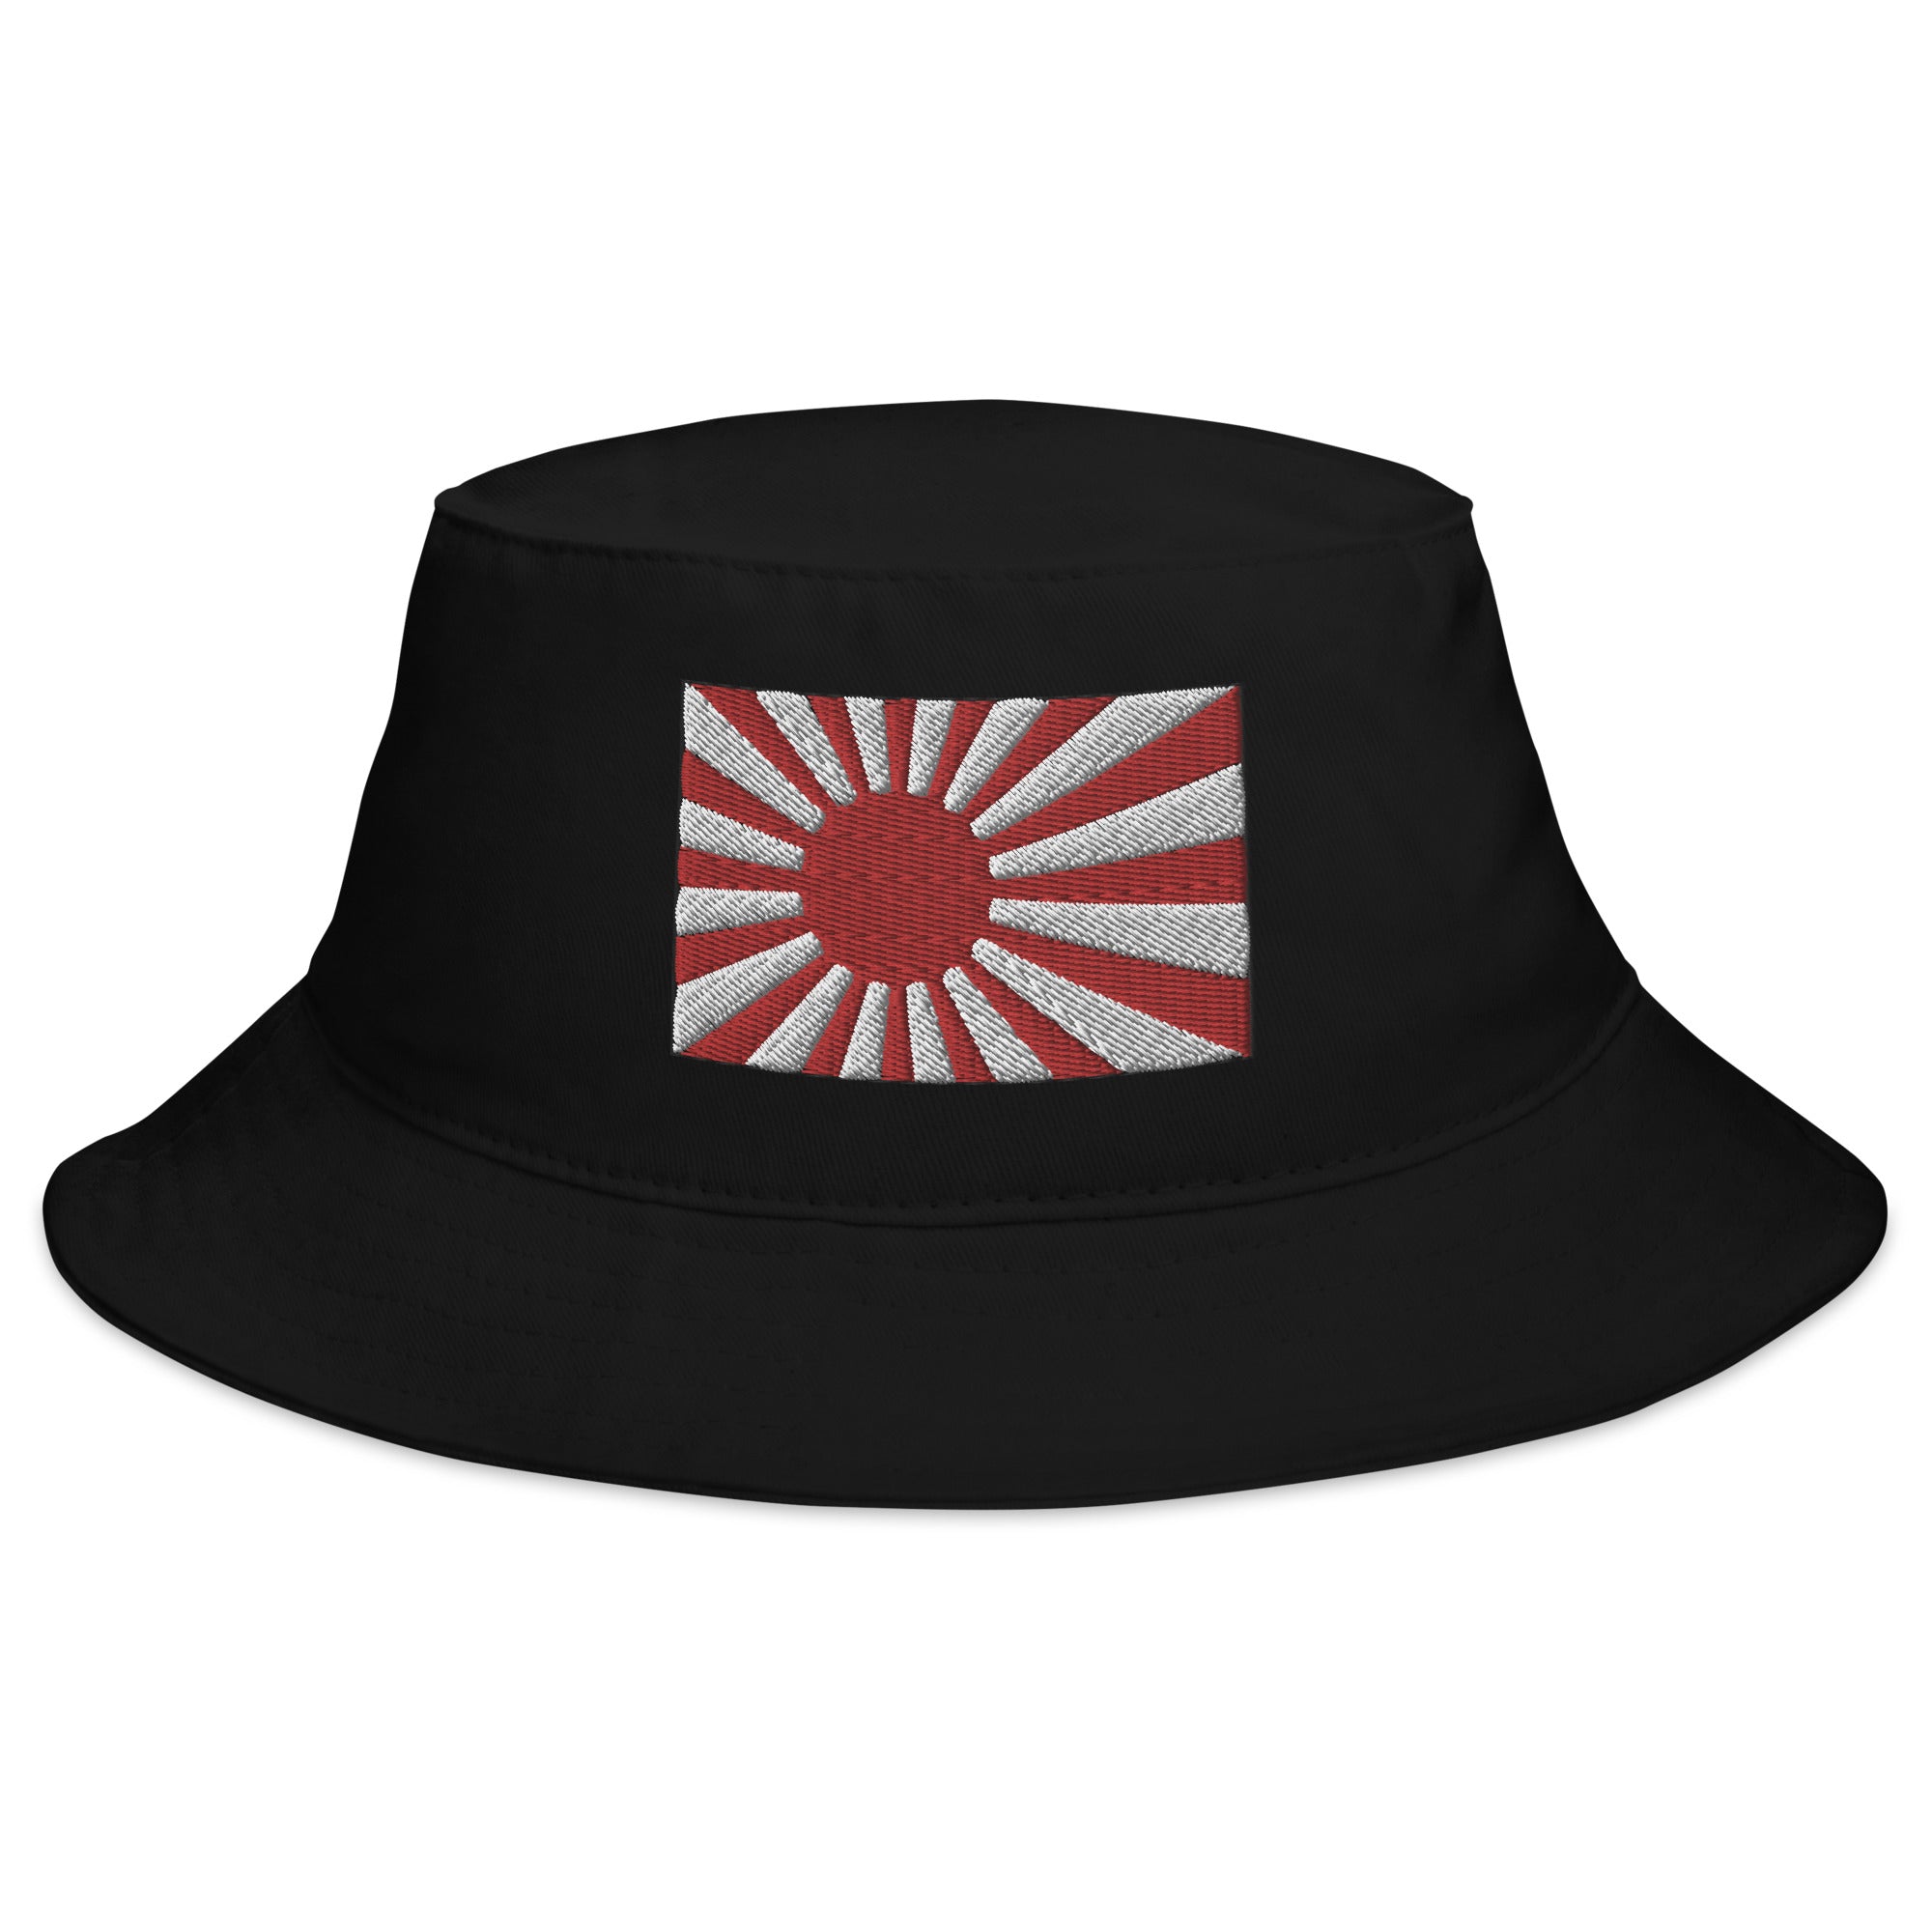 The National Flag of Japan Embroidered Bucket Hat Land of the Rising Sun